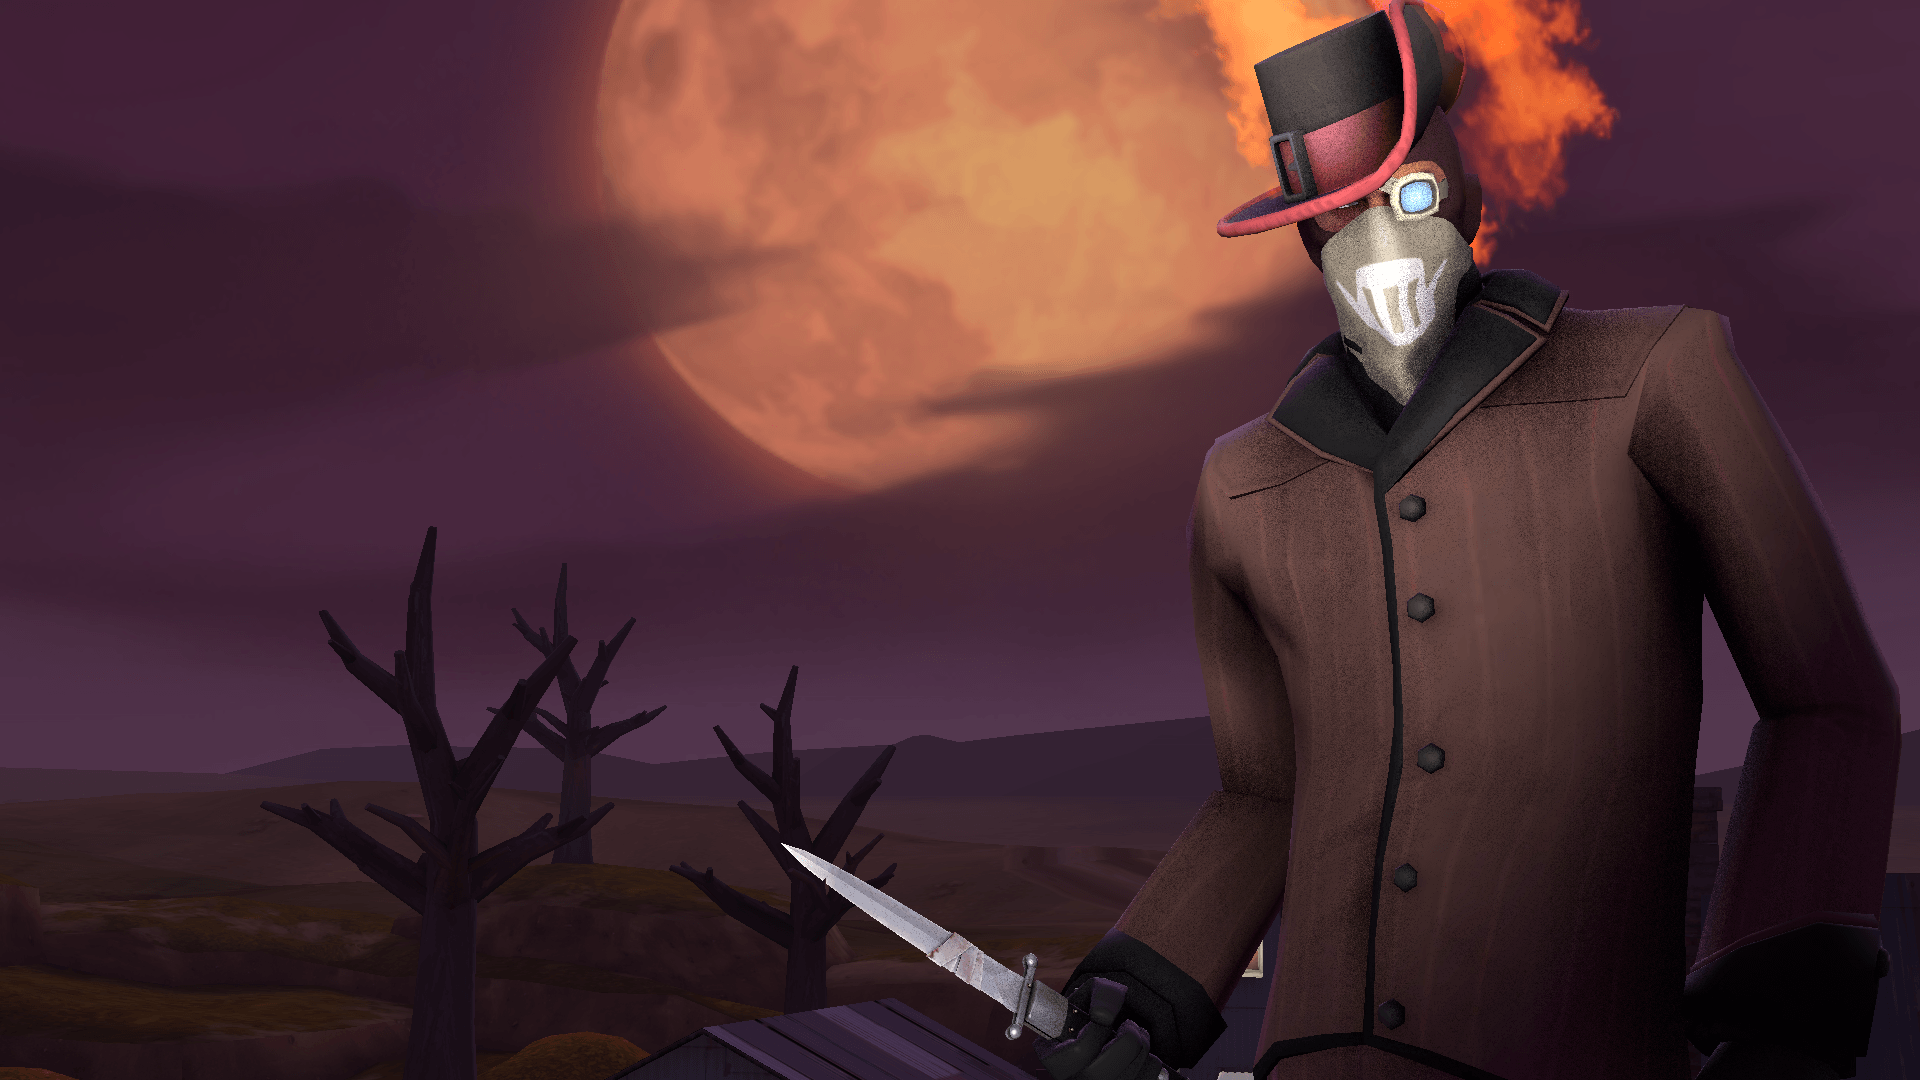 TF2 Unusual Spy Full HD Wallpaper and Background Imagex1080